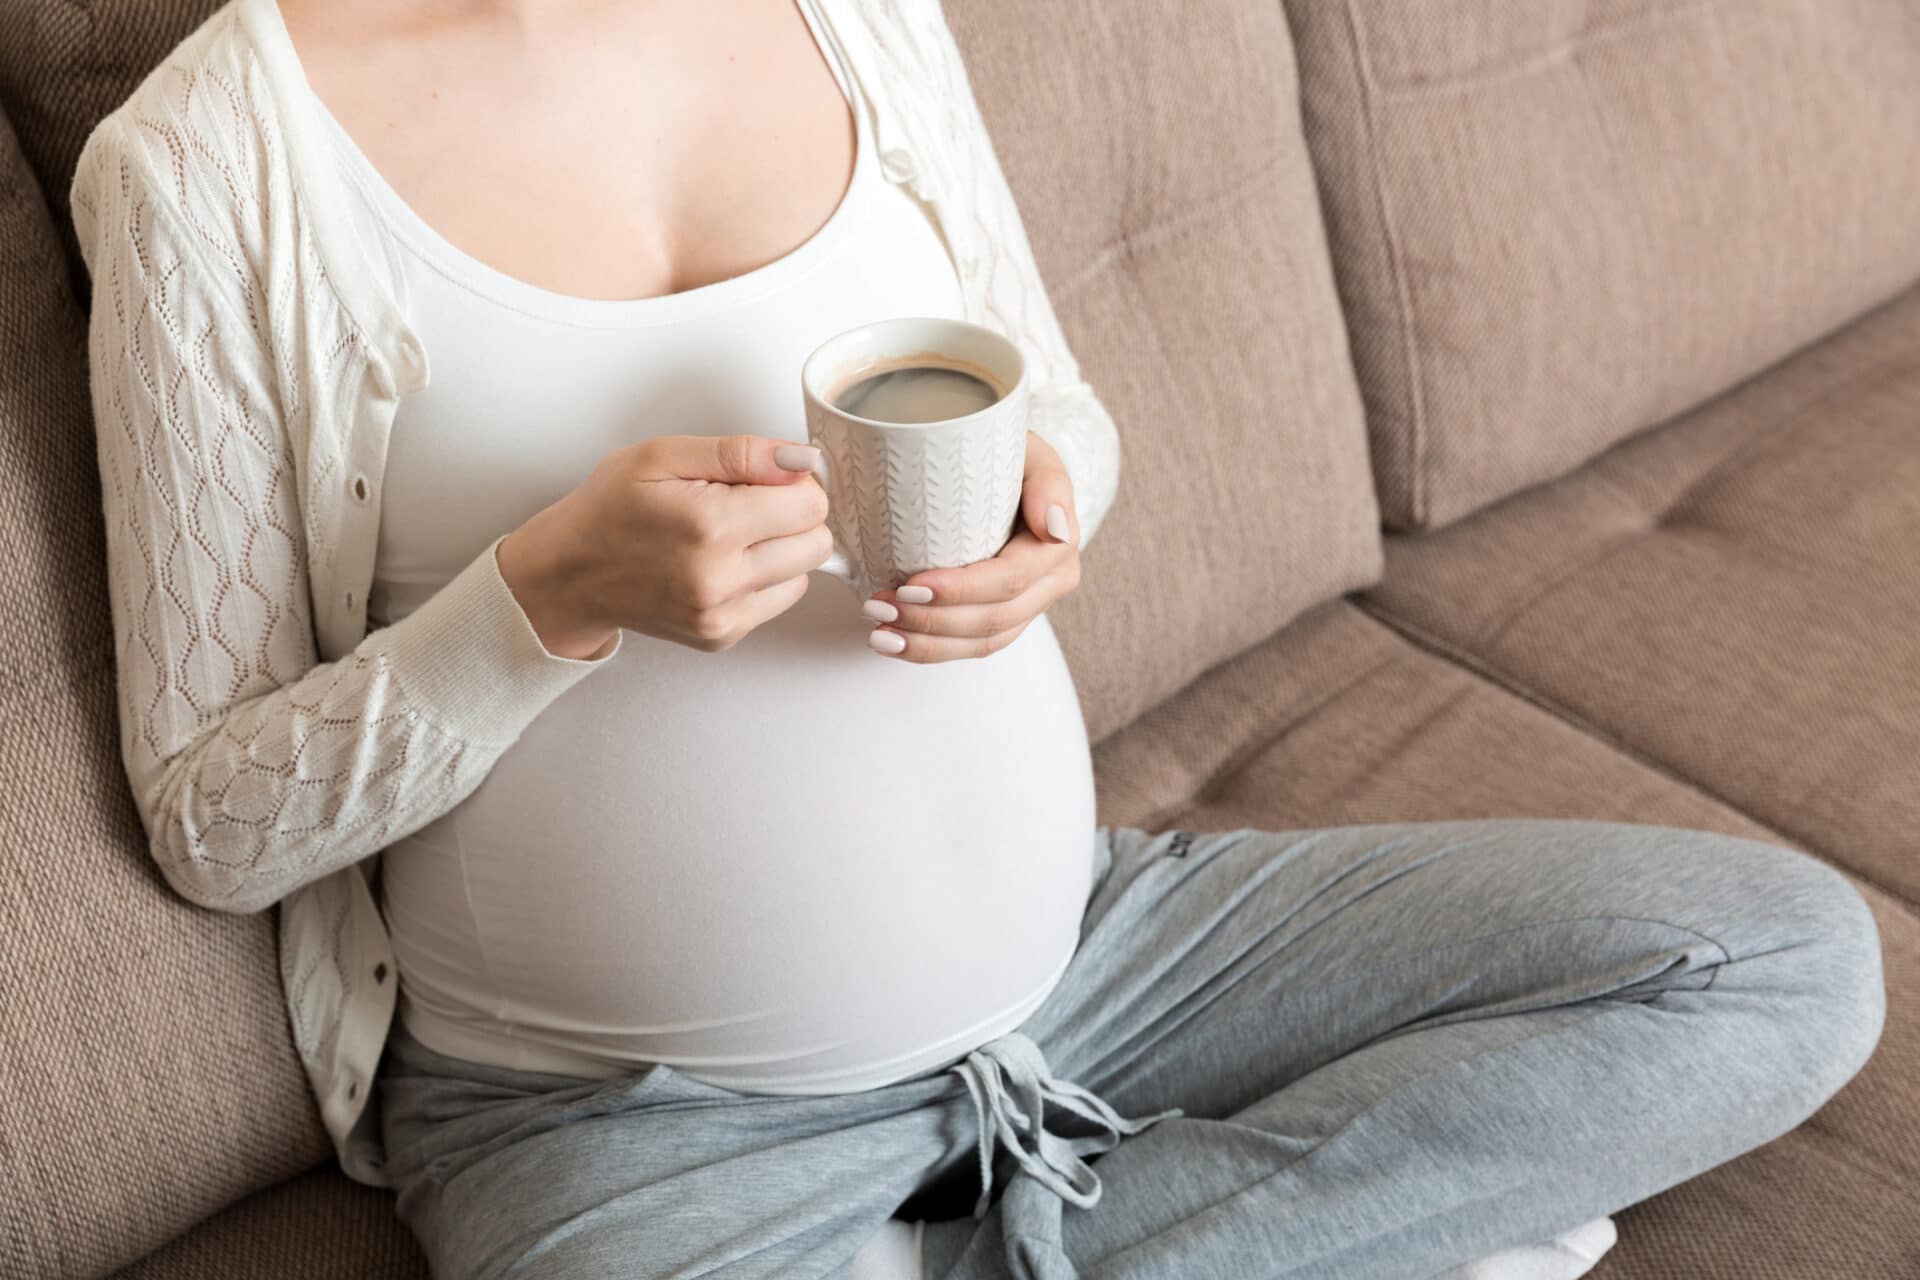 Can You Drink Loaded Teas While Pregnant?